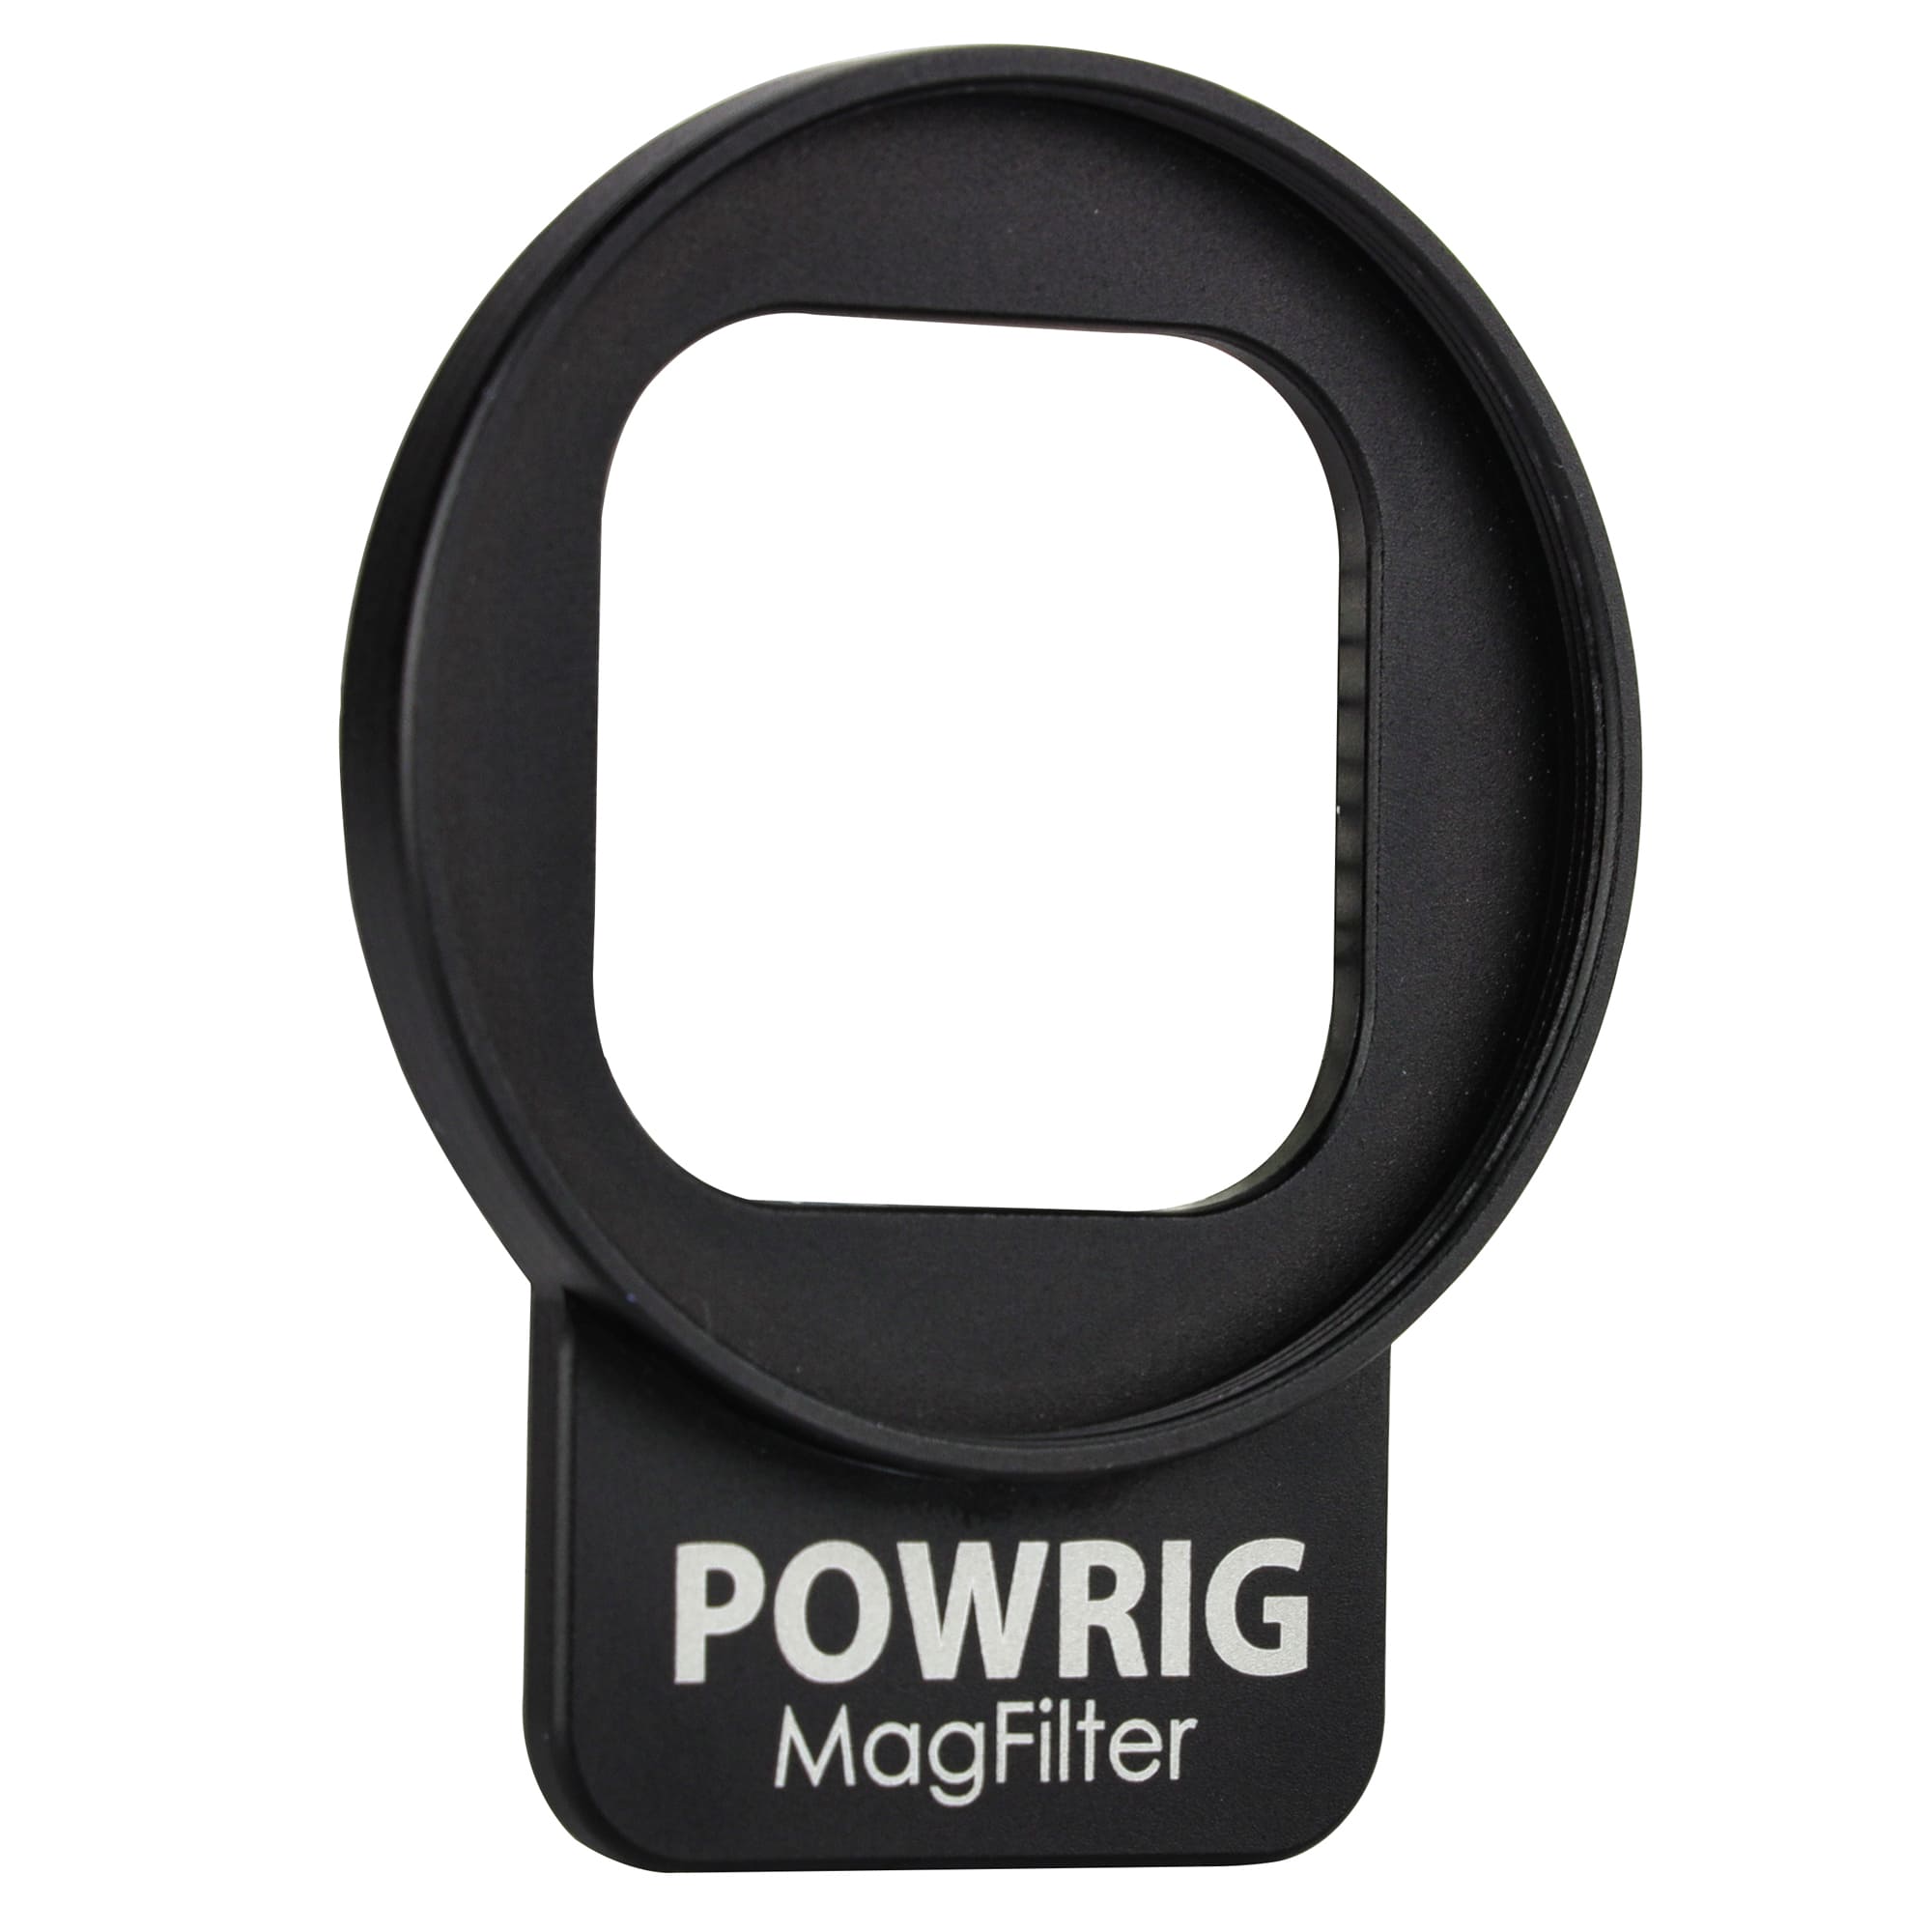 Magfilter filter mount - iPhone11 iPhone12 - POWRIG Photo & Video Gear